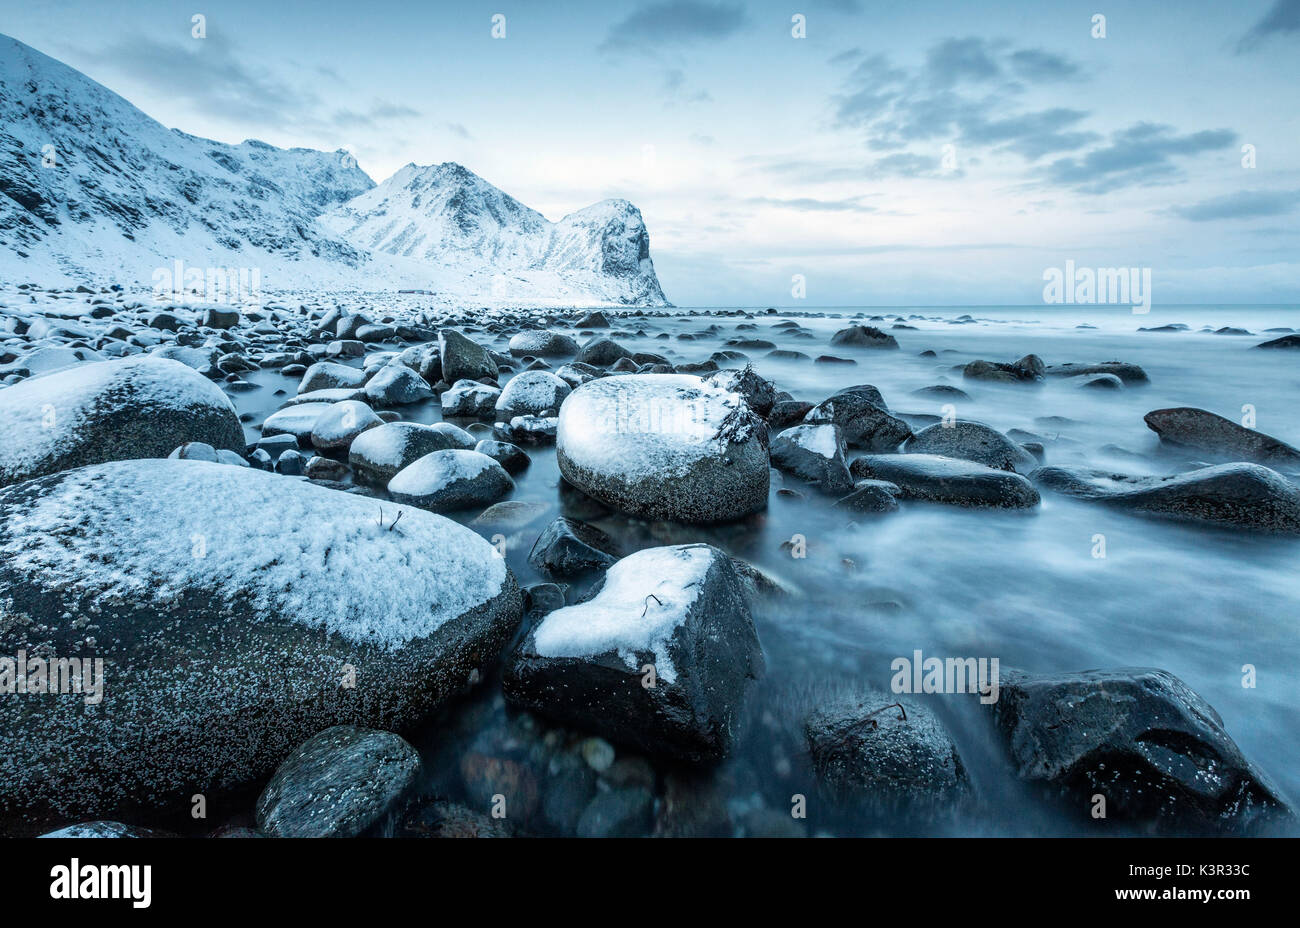 Rocks in the cold sea and snow capped mountains under the blue light of dusk Unstad Lofoten Islands Northern Norway Europe Stock Photo